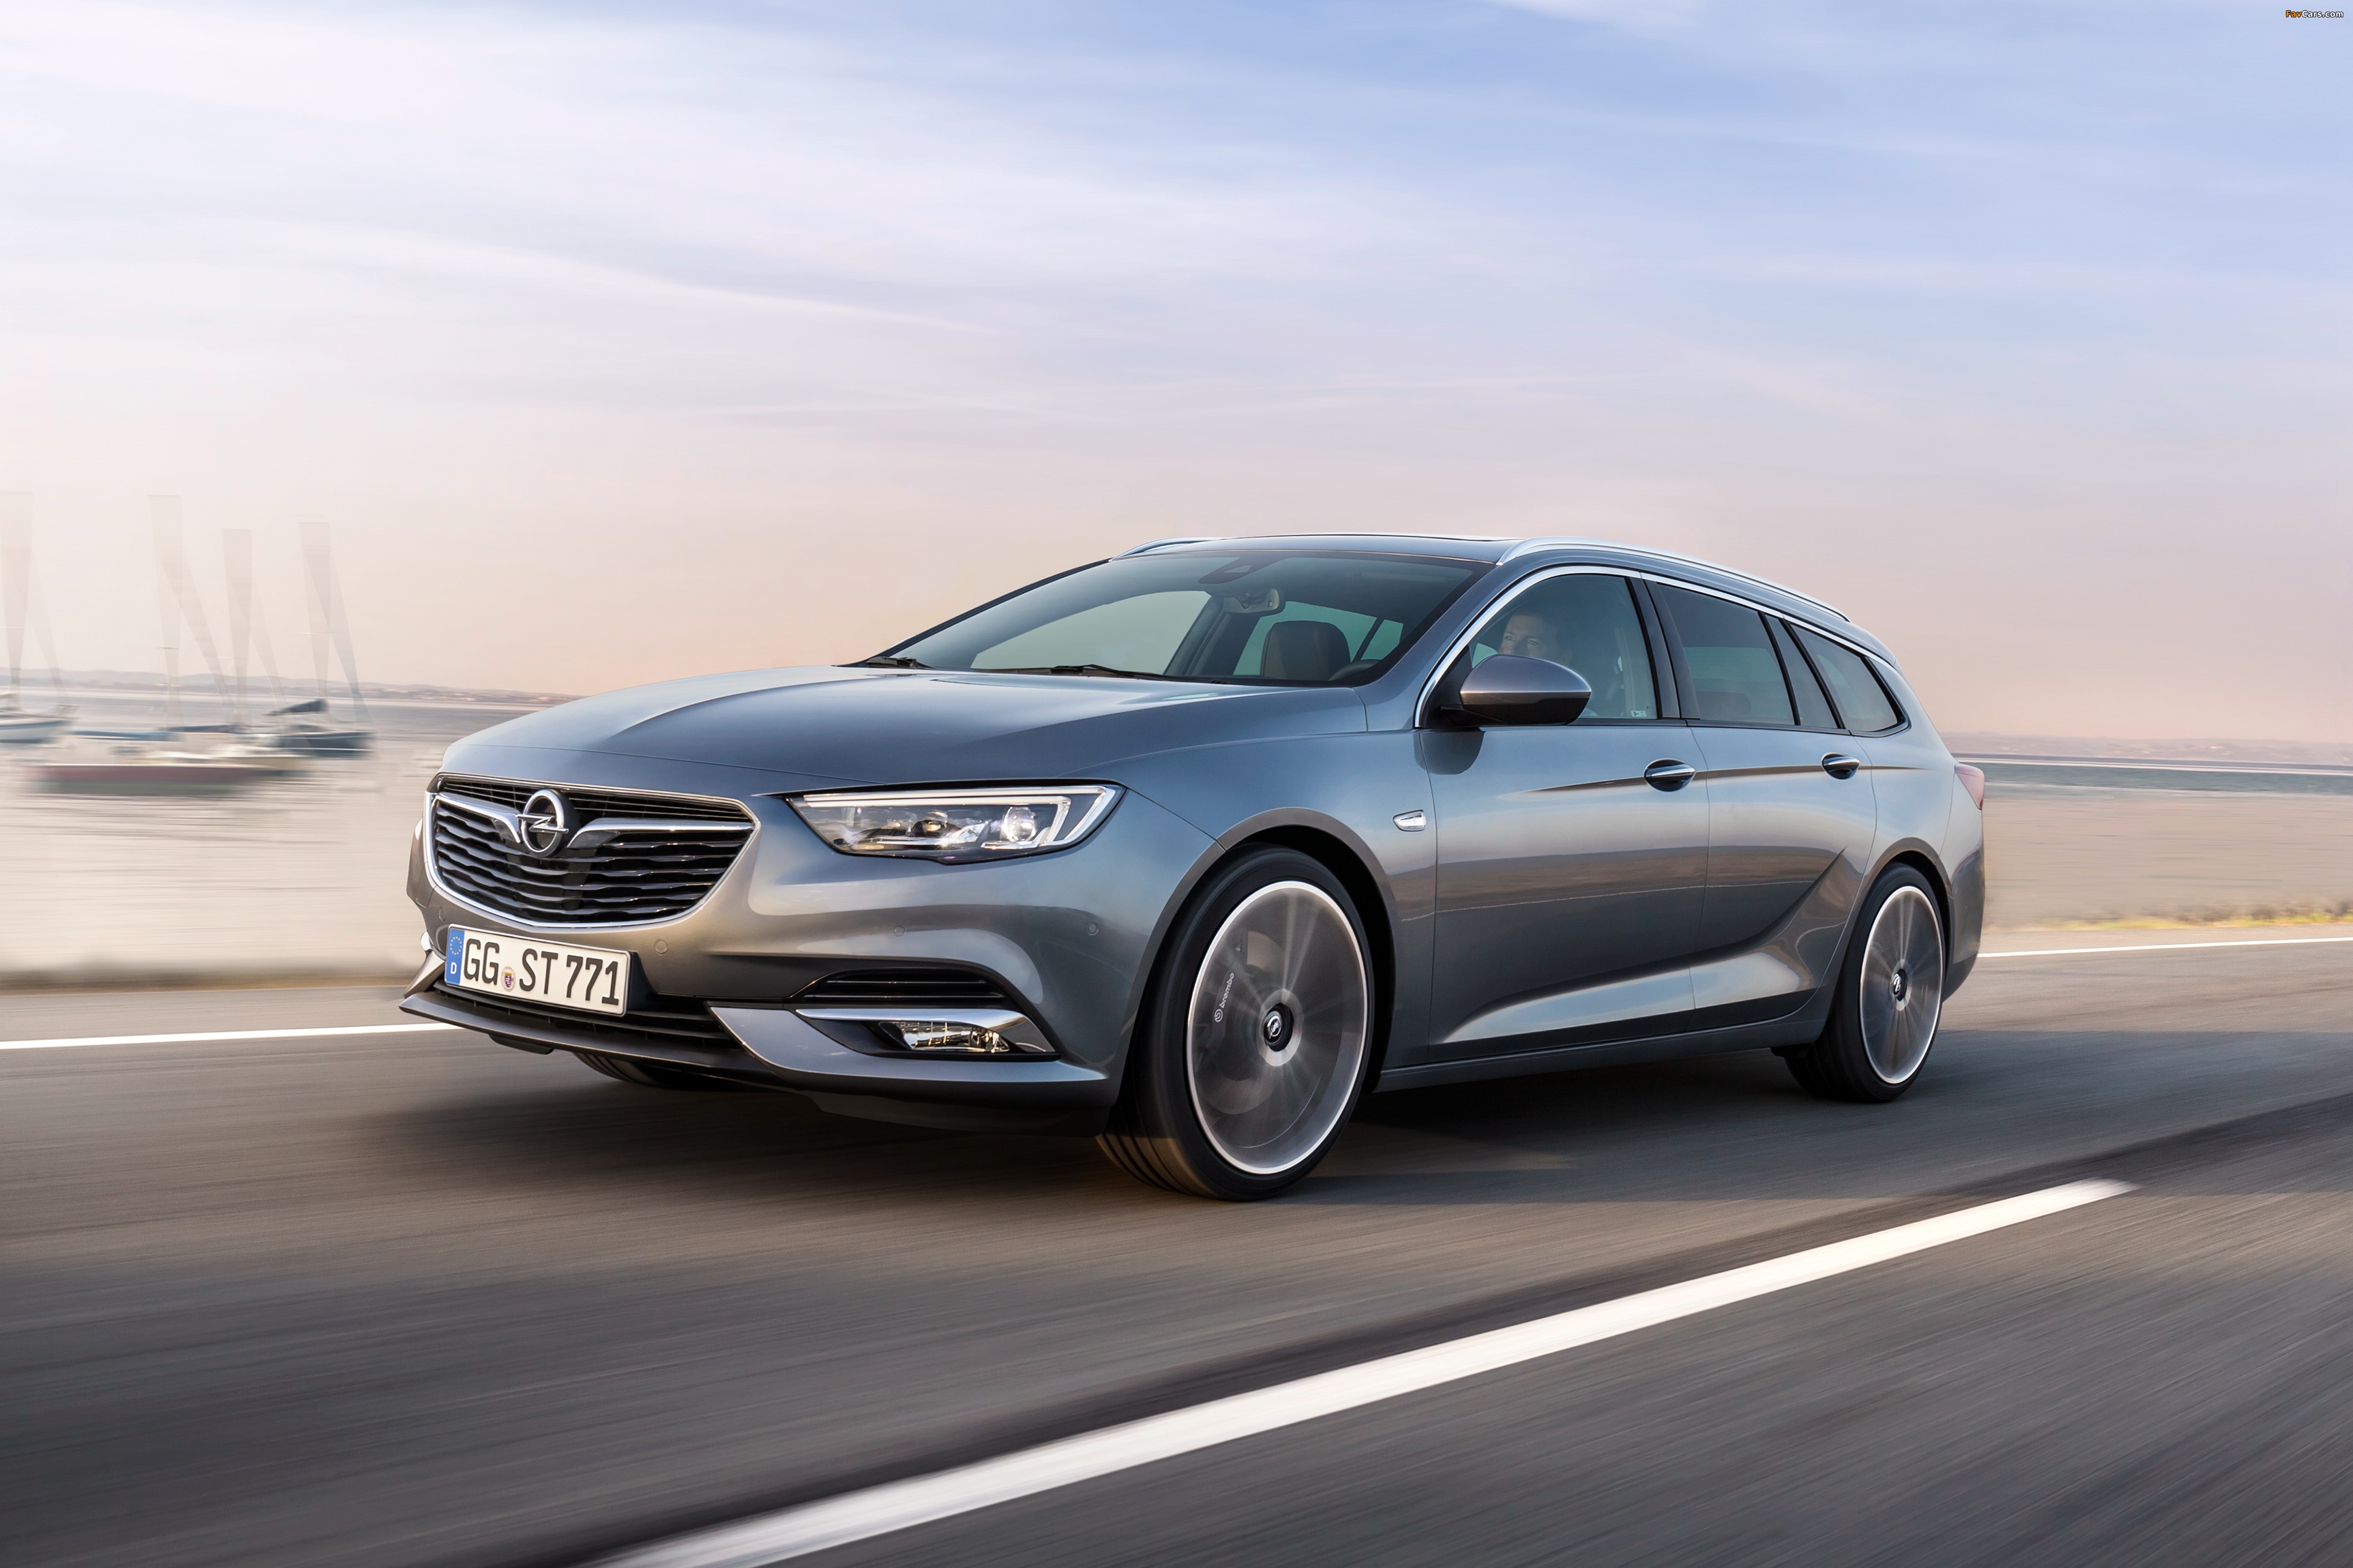 Opel Insignia Sports Tourer 4×4 2017 images (4096 x 2730)